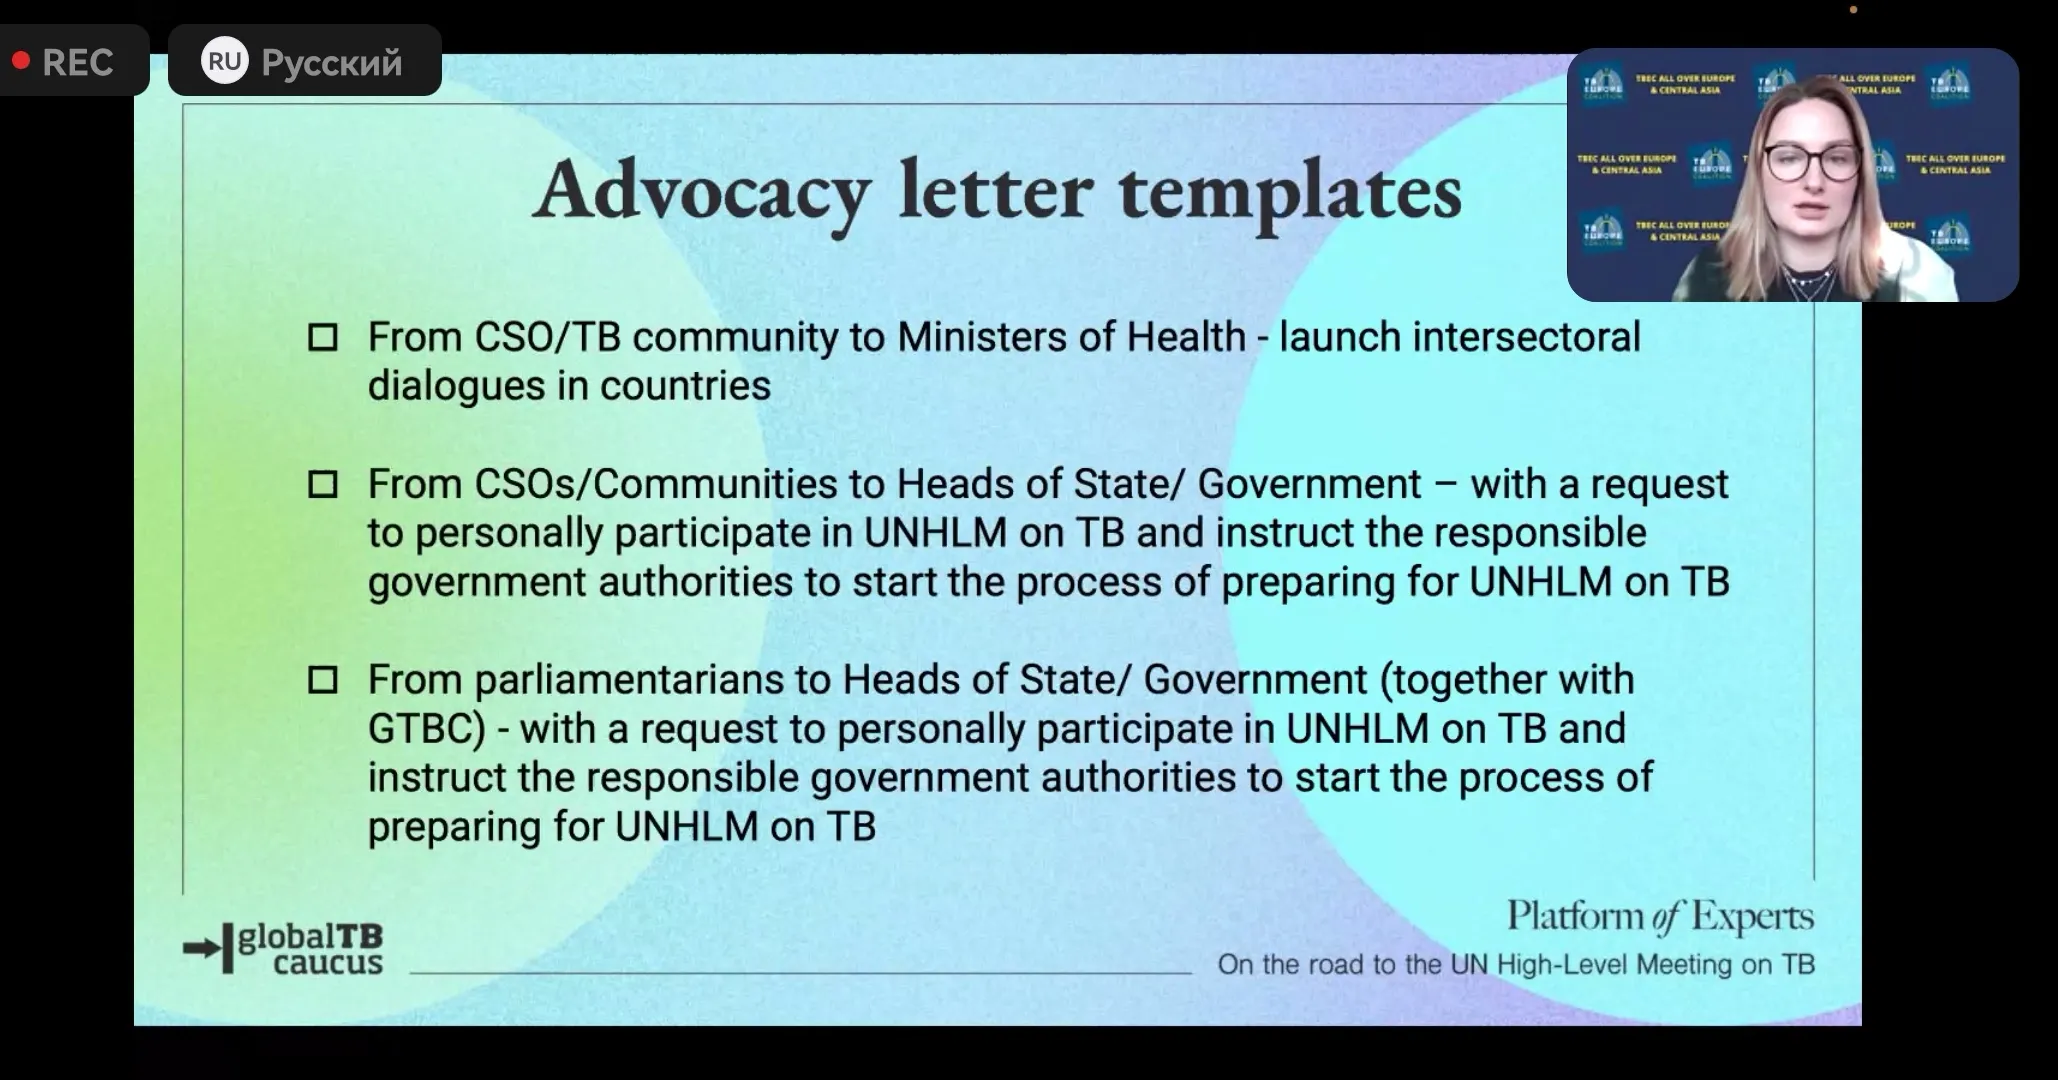 The plans of the TBEC for World TB Day in the context of advocacy work on the eve of the UN High-Level Meeting on TB